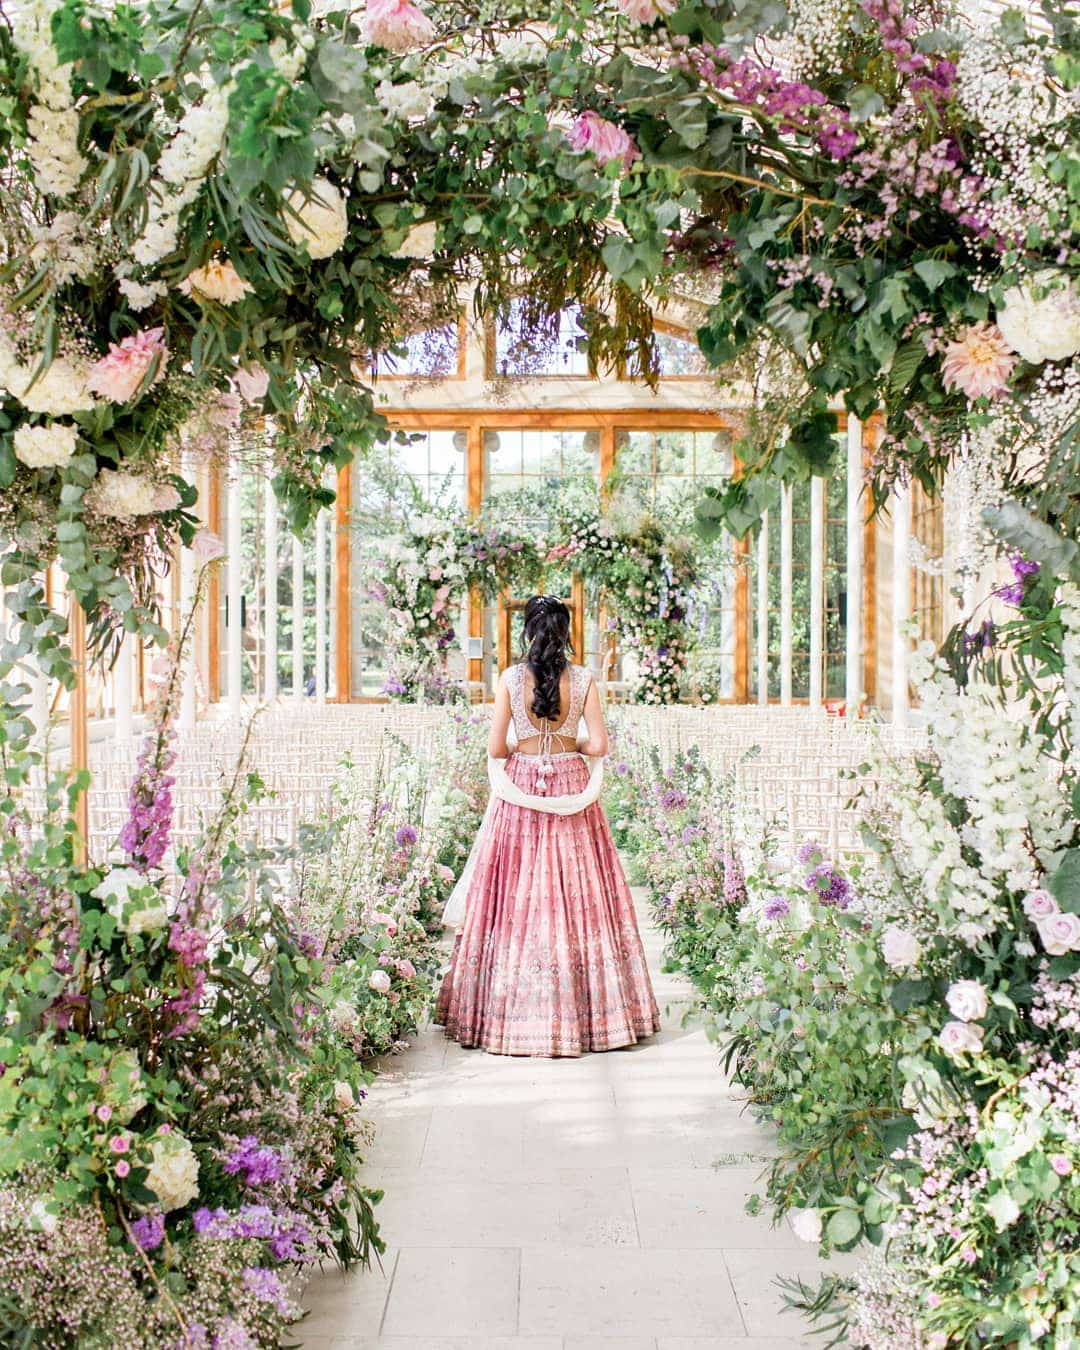 These are the biggest wedding decor ideas to work with in 2020